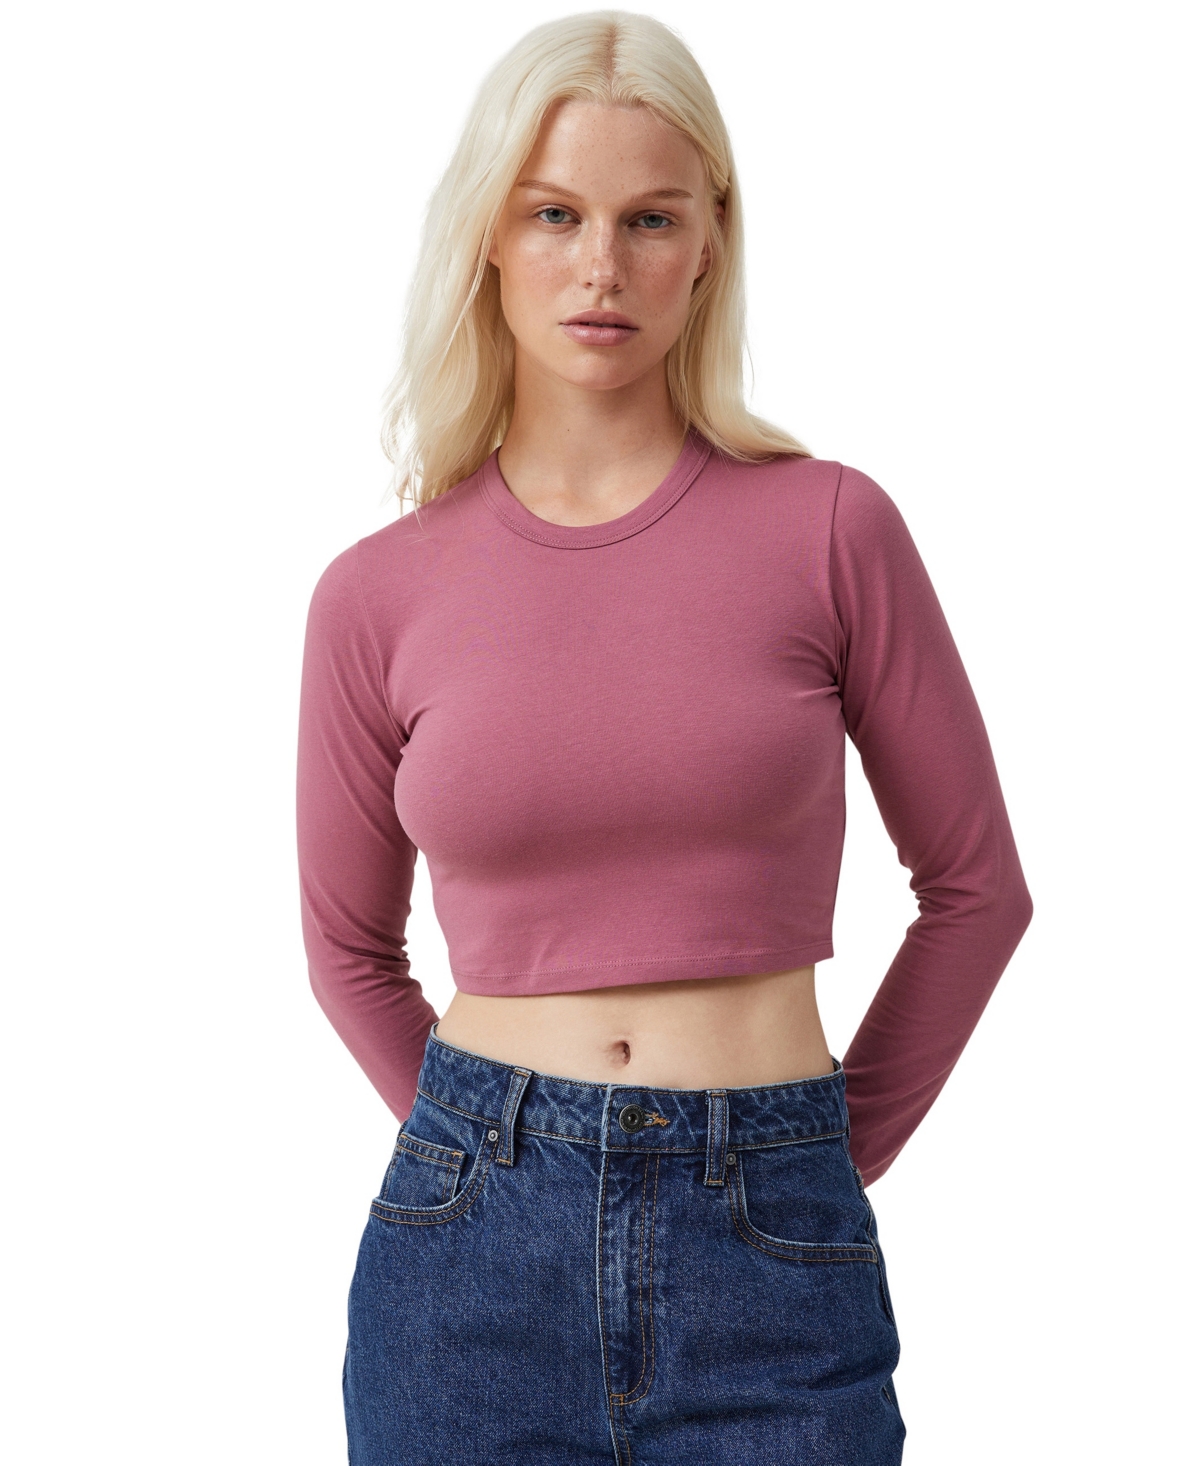 Cotton On Women's Micro Crop Long Sleeve Top In Soft Berry